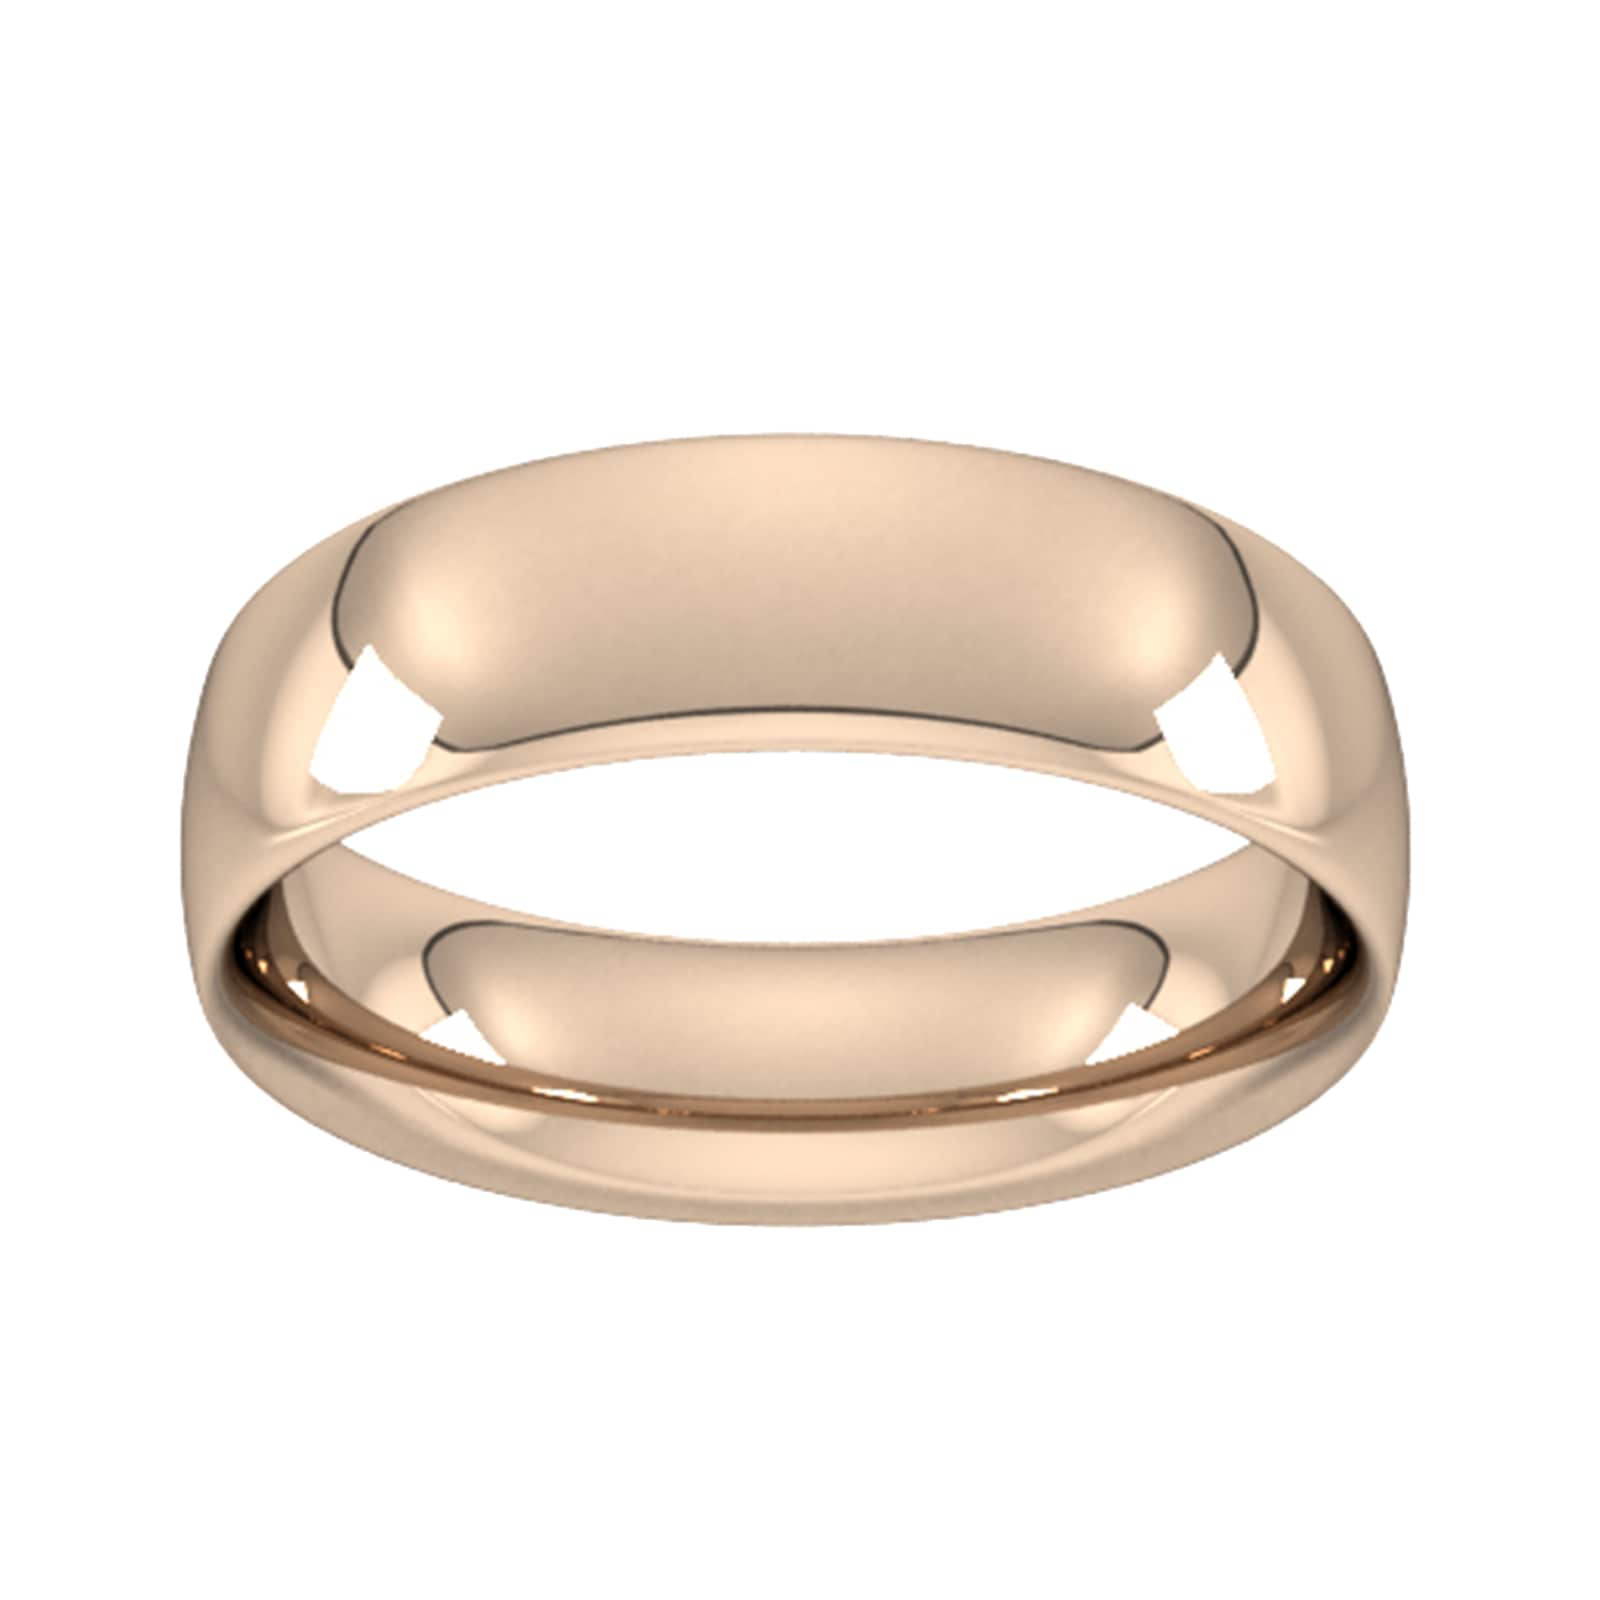 6mm Traditional Court Heavy Wedding Ring In 18 Carat Rose Gold - Ring Size K